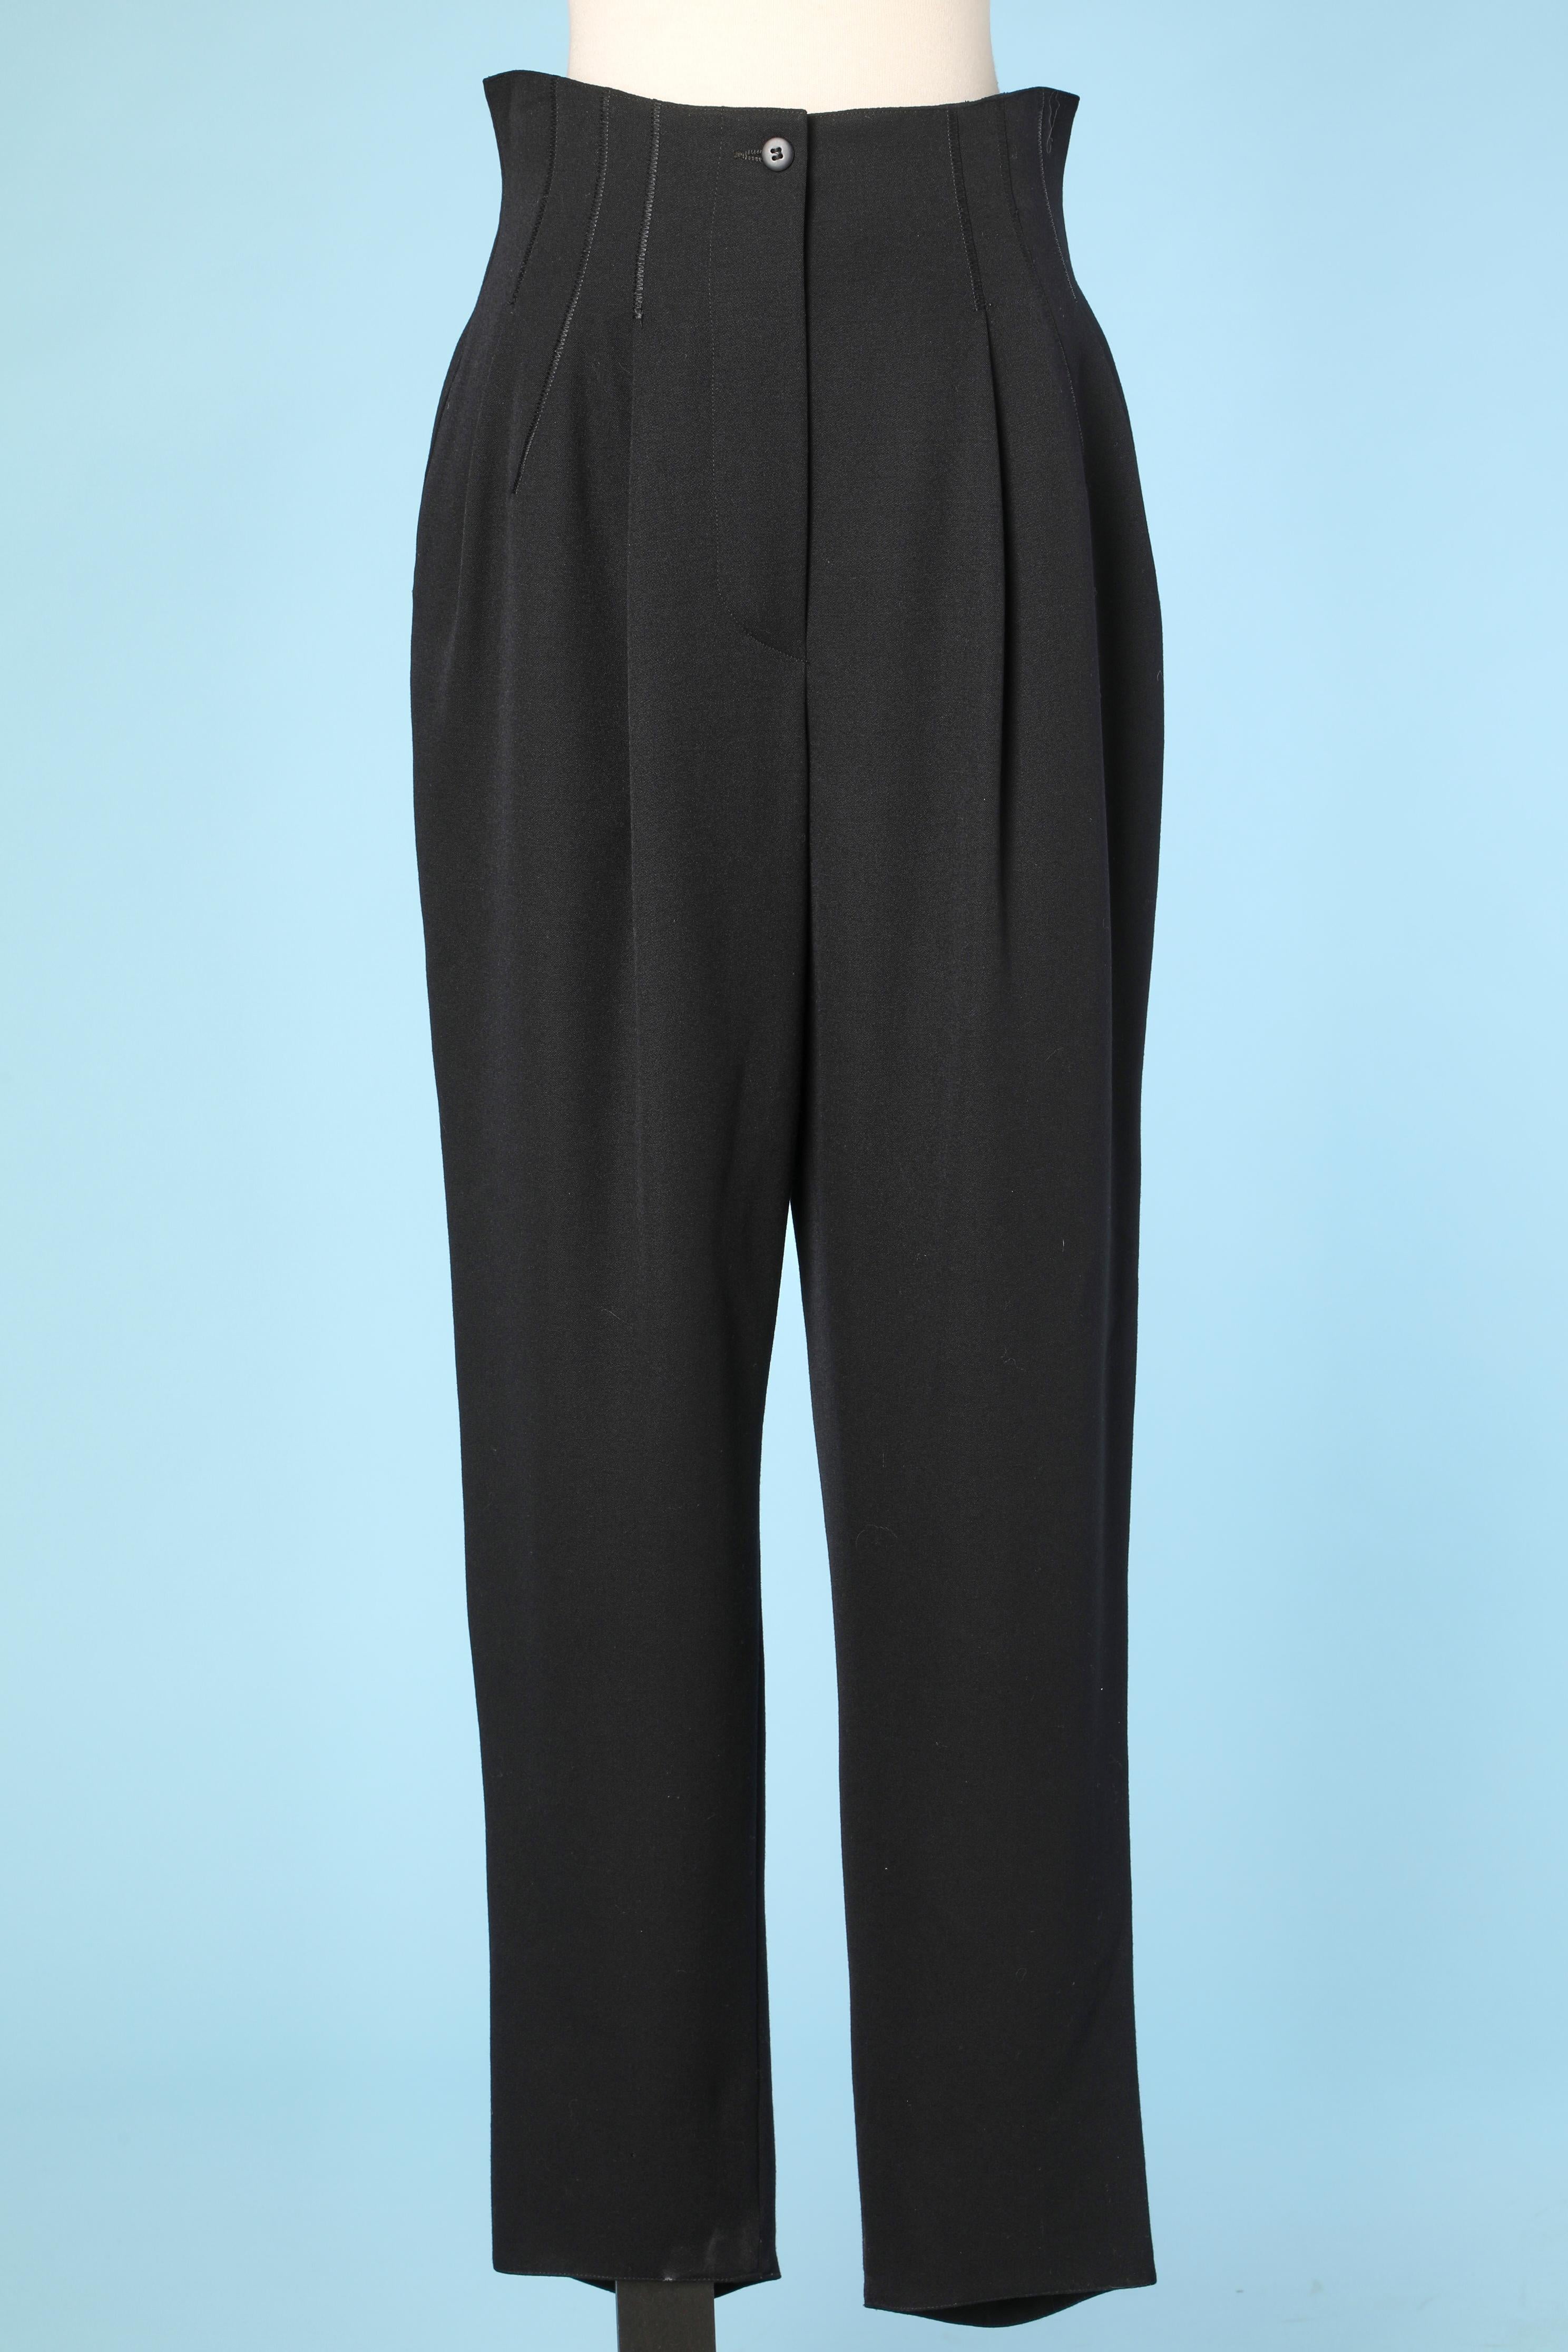 Black trouser pant suit in dry wool and graphic collar Claude Montana 3